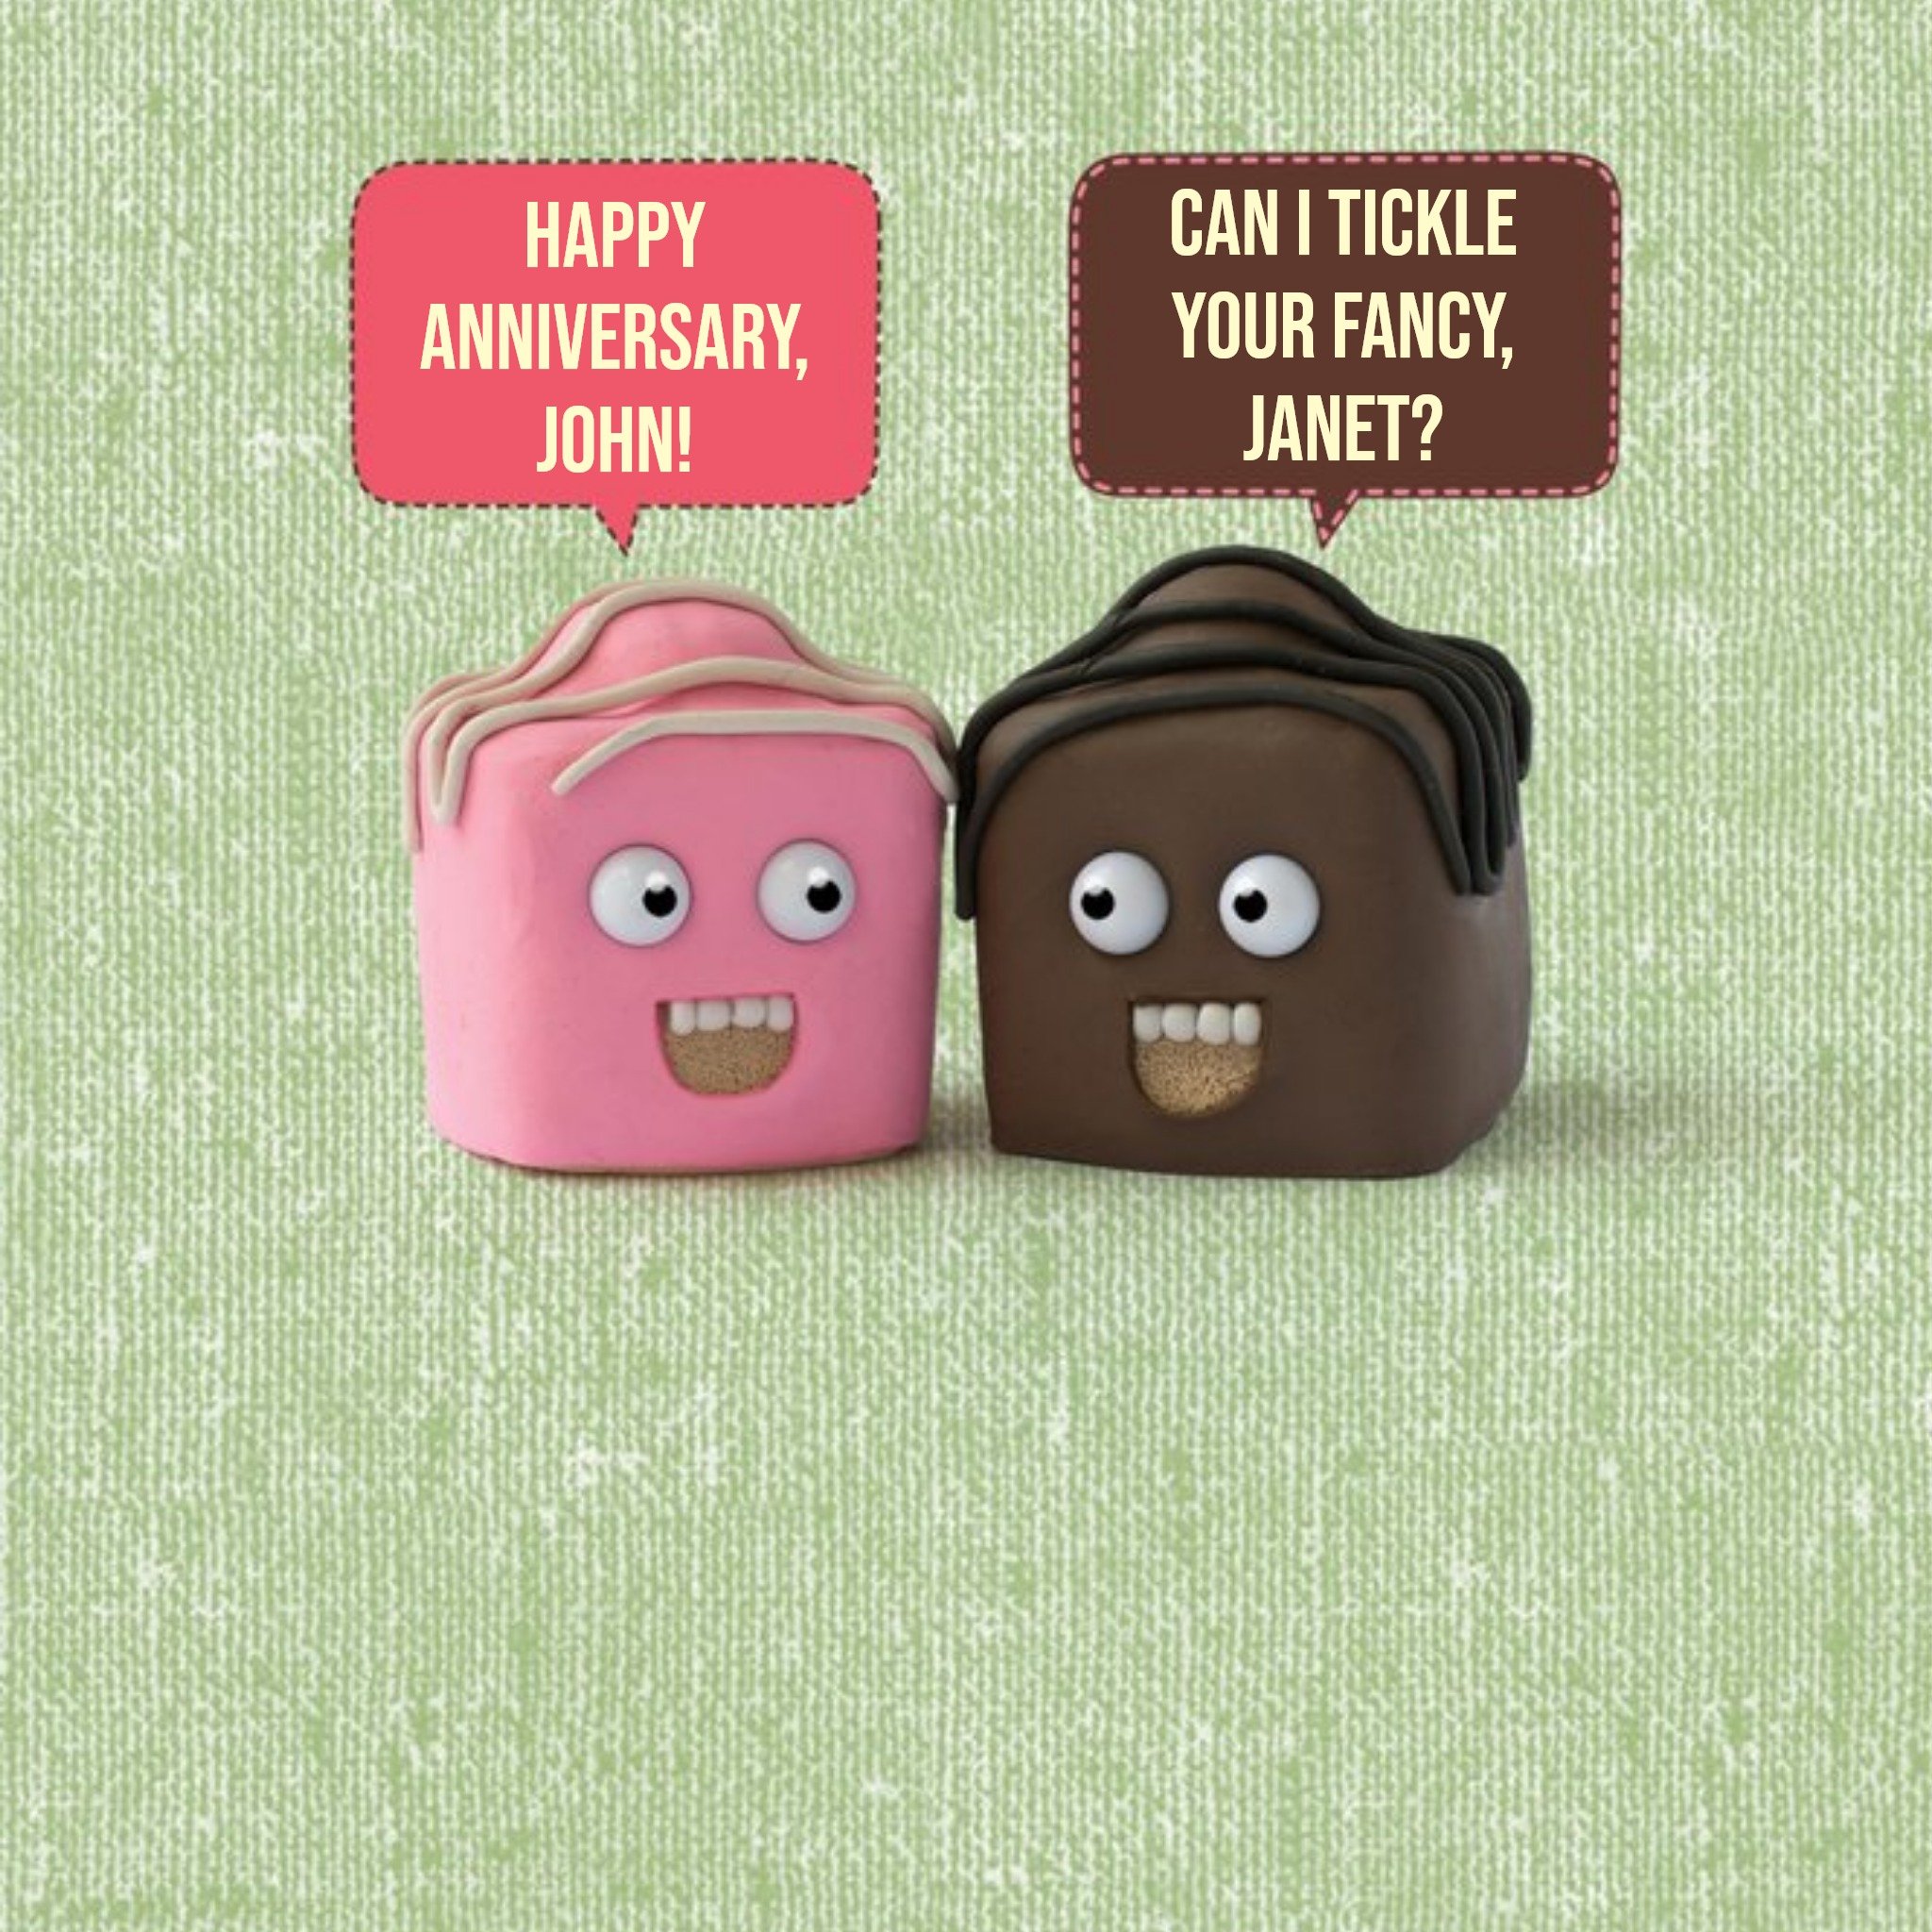 Moonpig Chocolate Truffles Can I Tickle Your Fancy Personalised Anniversary Card, Large